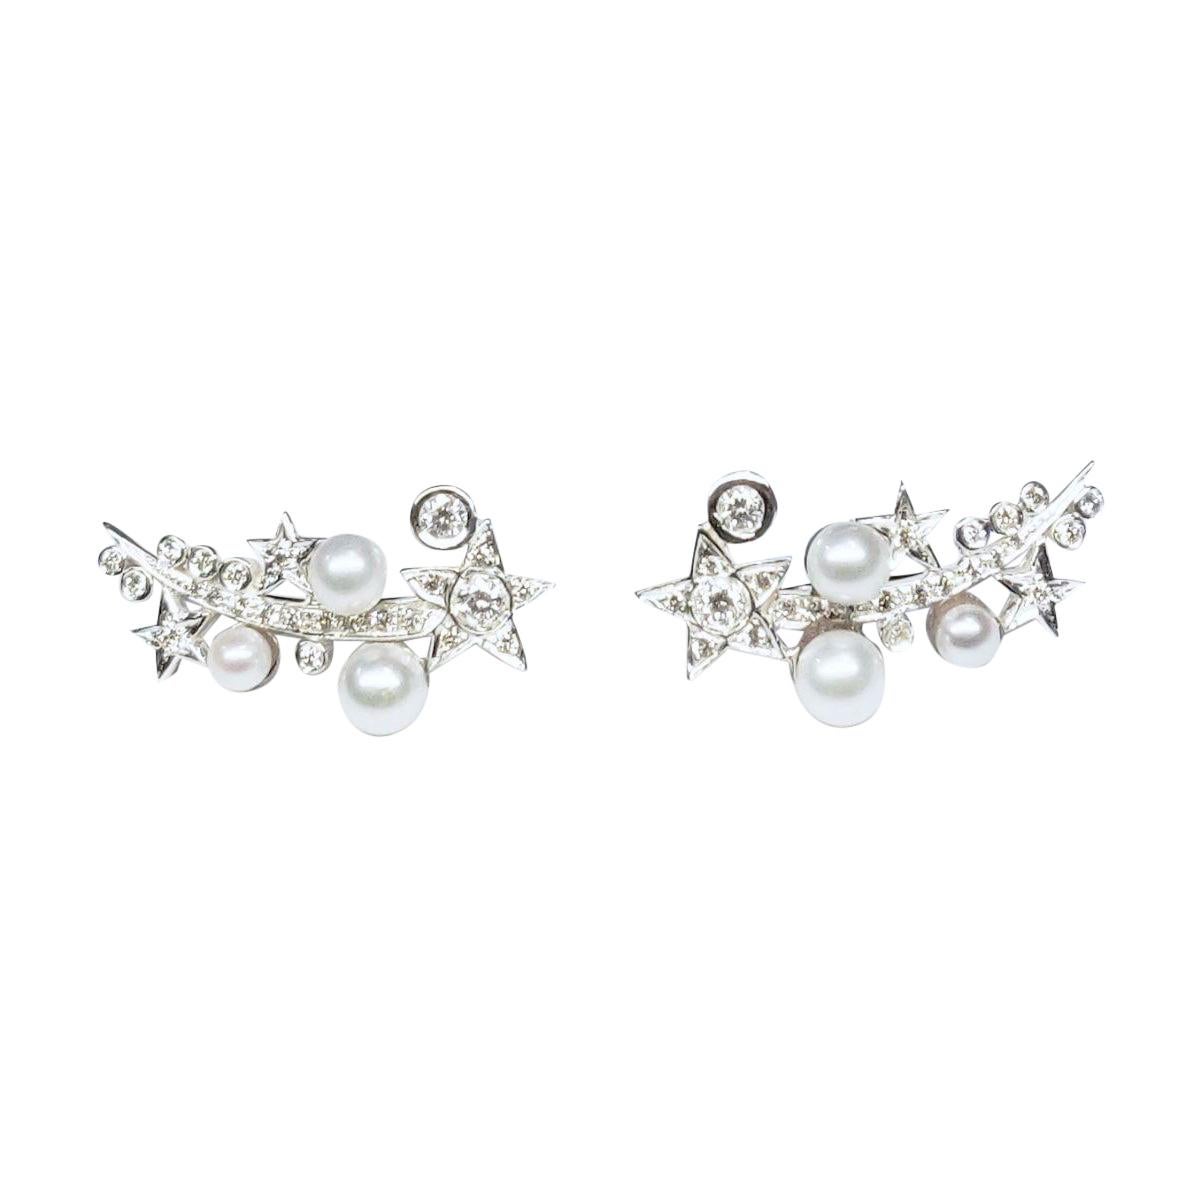 BOON Moving Across the Starry Pearly Sky Diamond 18k Gold Ear Cuff Earrings For Sale